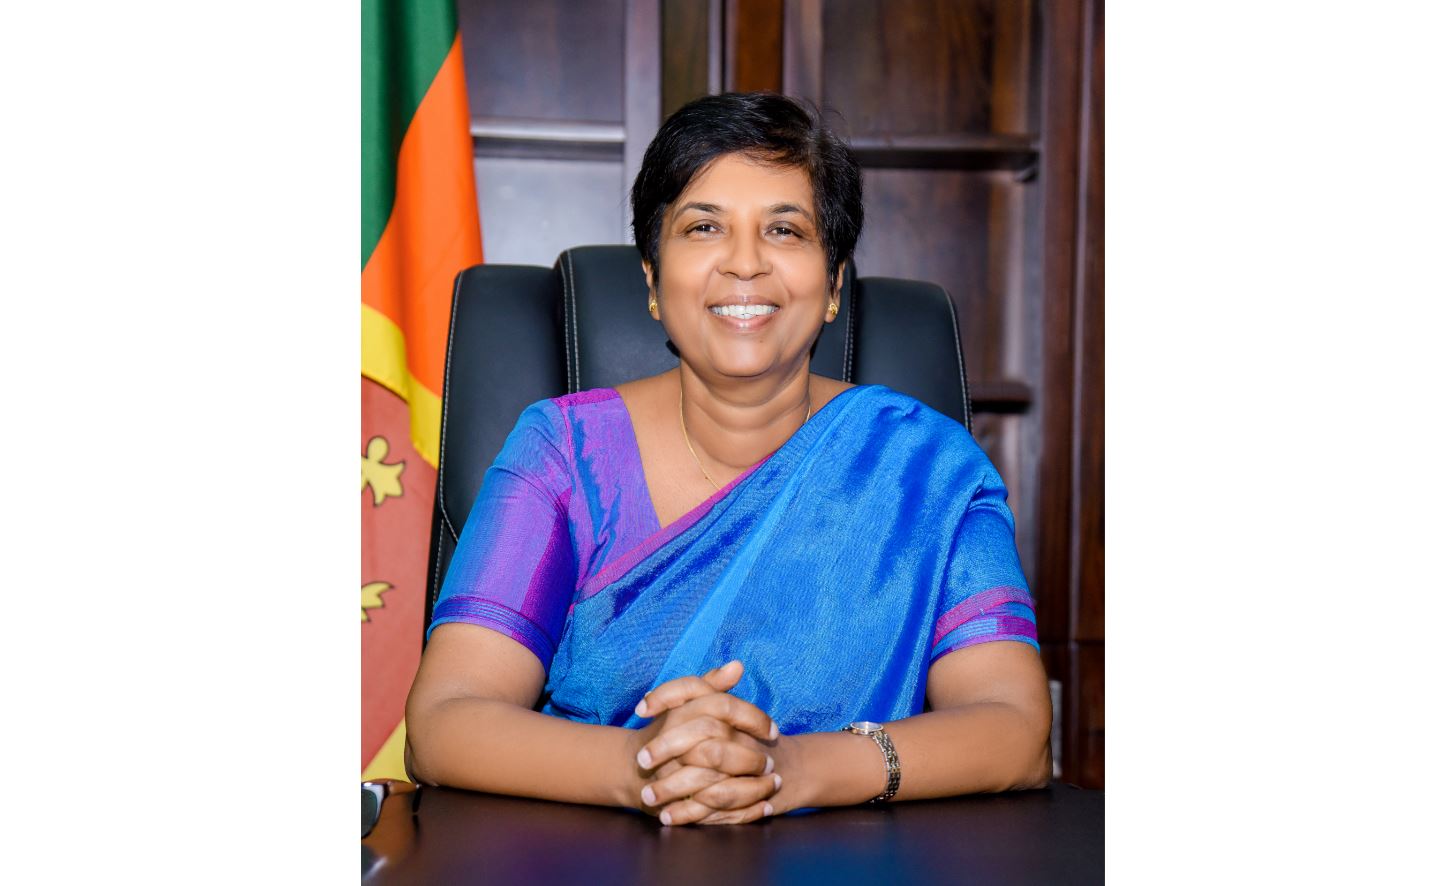 Not only women but also entire society should come forward to safeguard children – Minister Dr. Sudarshini Fernandopulle